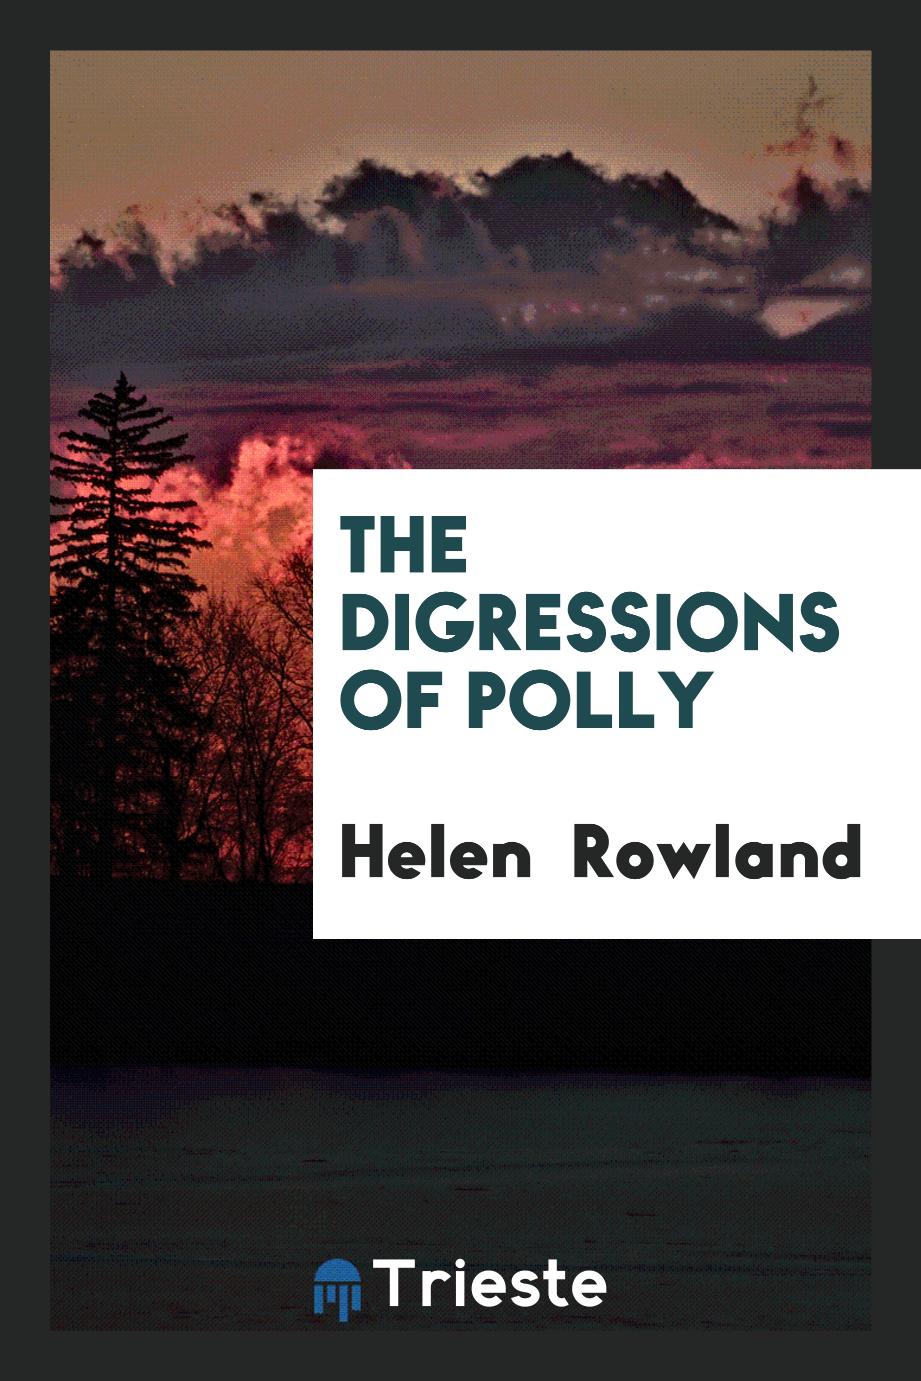 Helen  Rowland - The Digressions of Polly